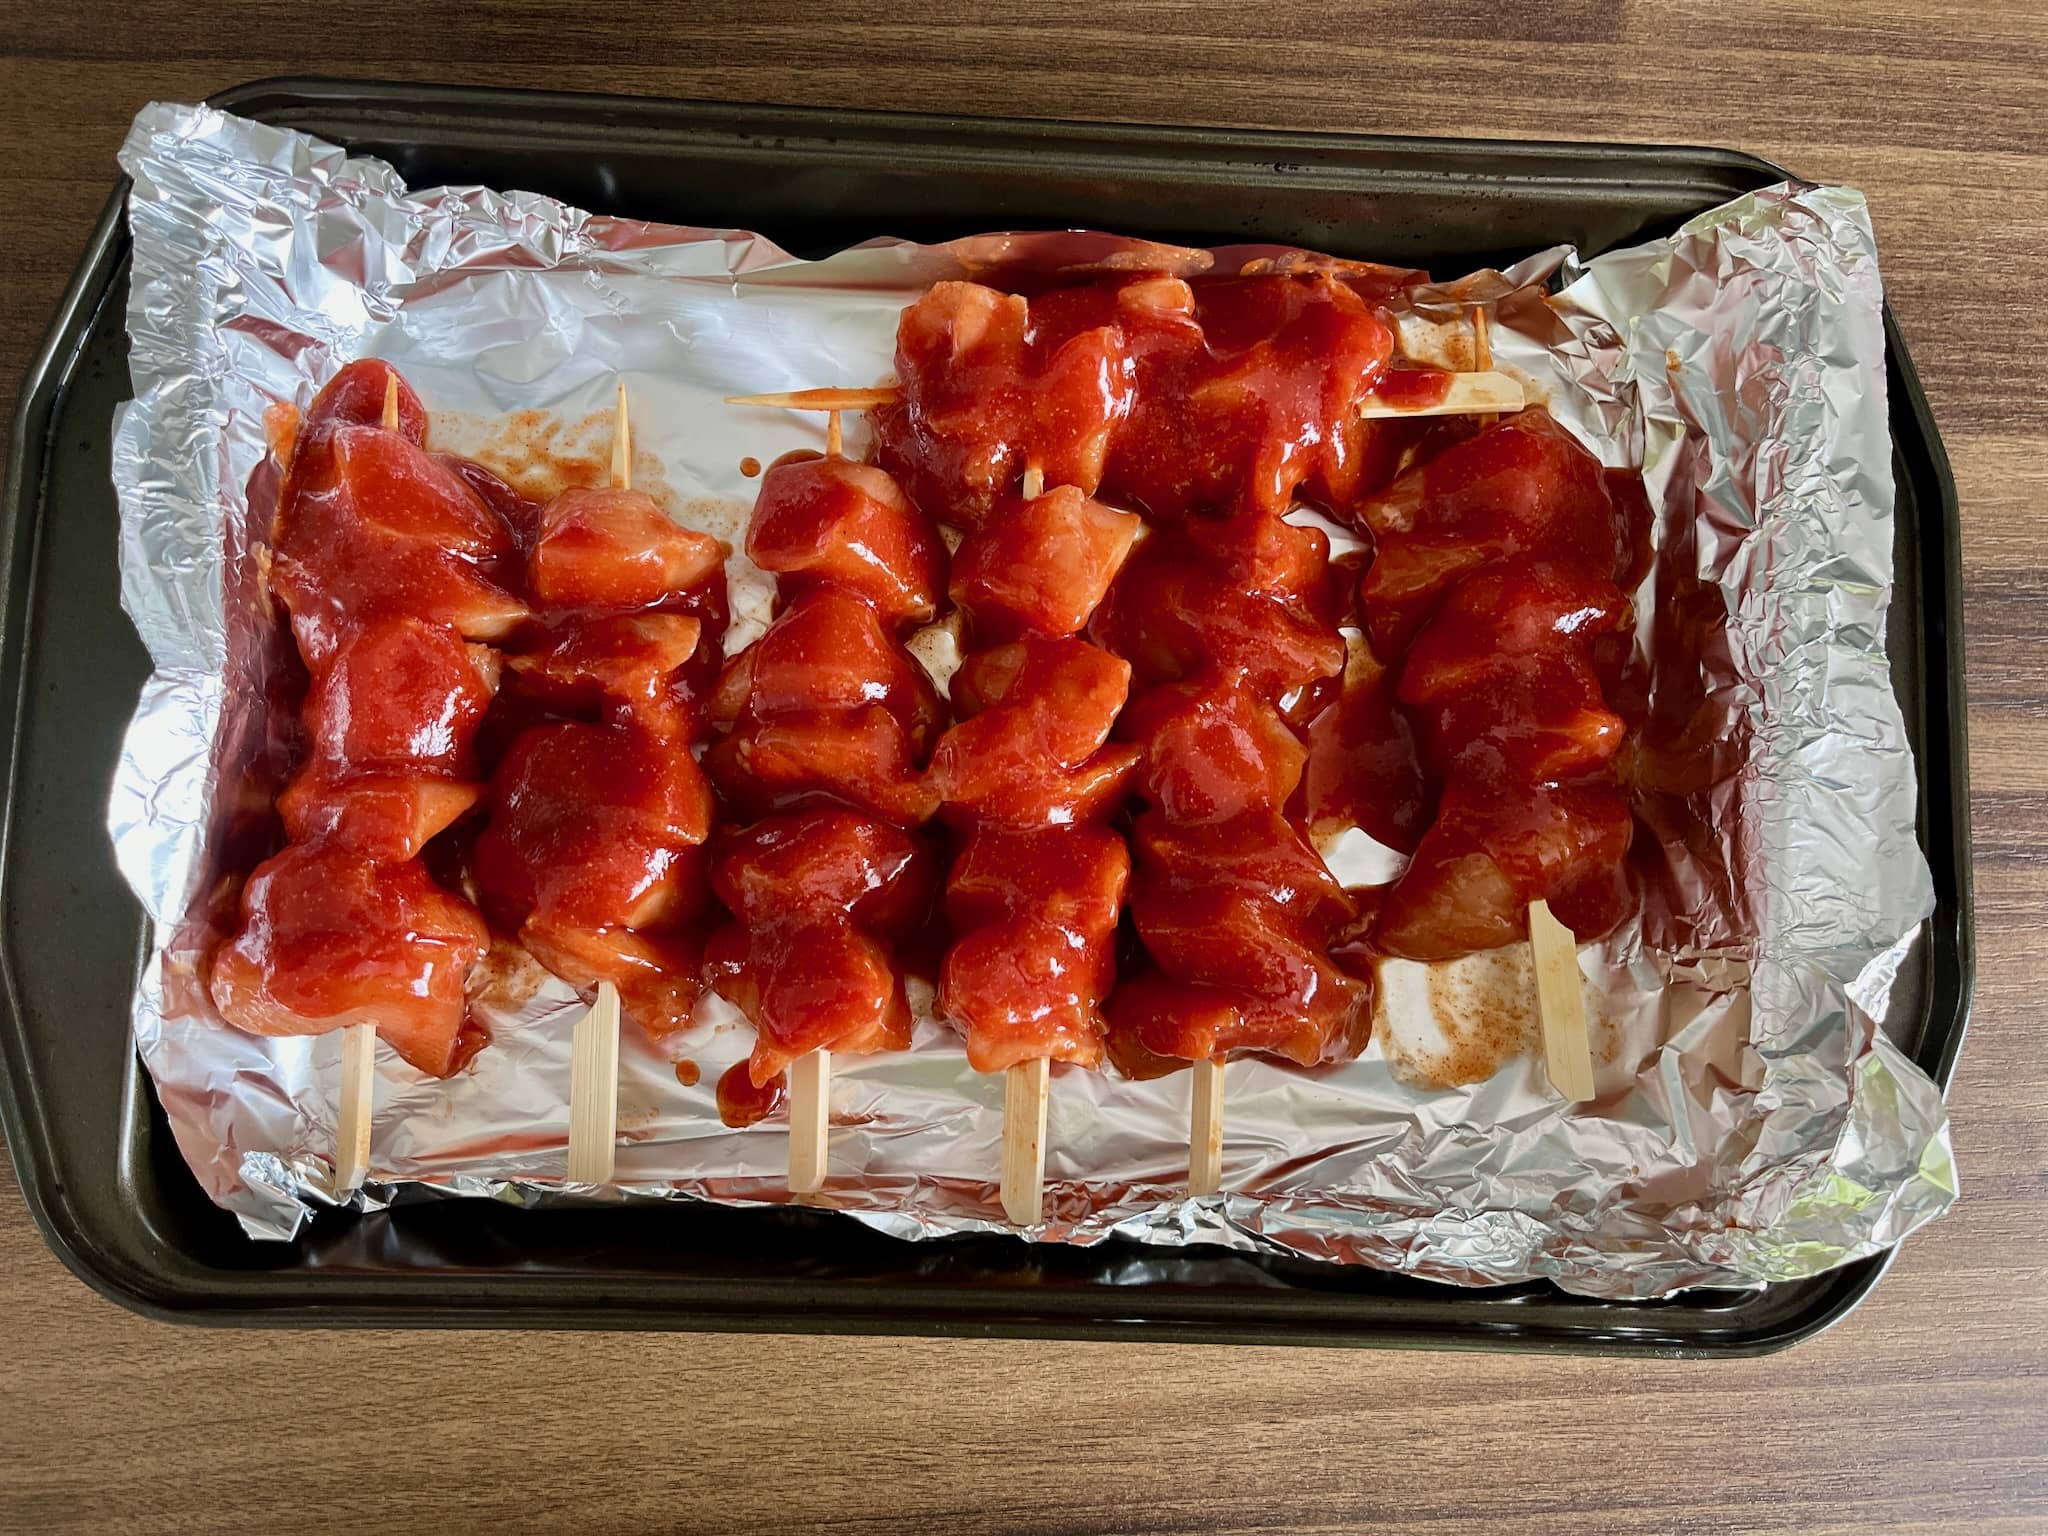 Impaled chicken breast cubes on skewers covered with sticky sauce in a baking tray